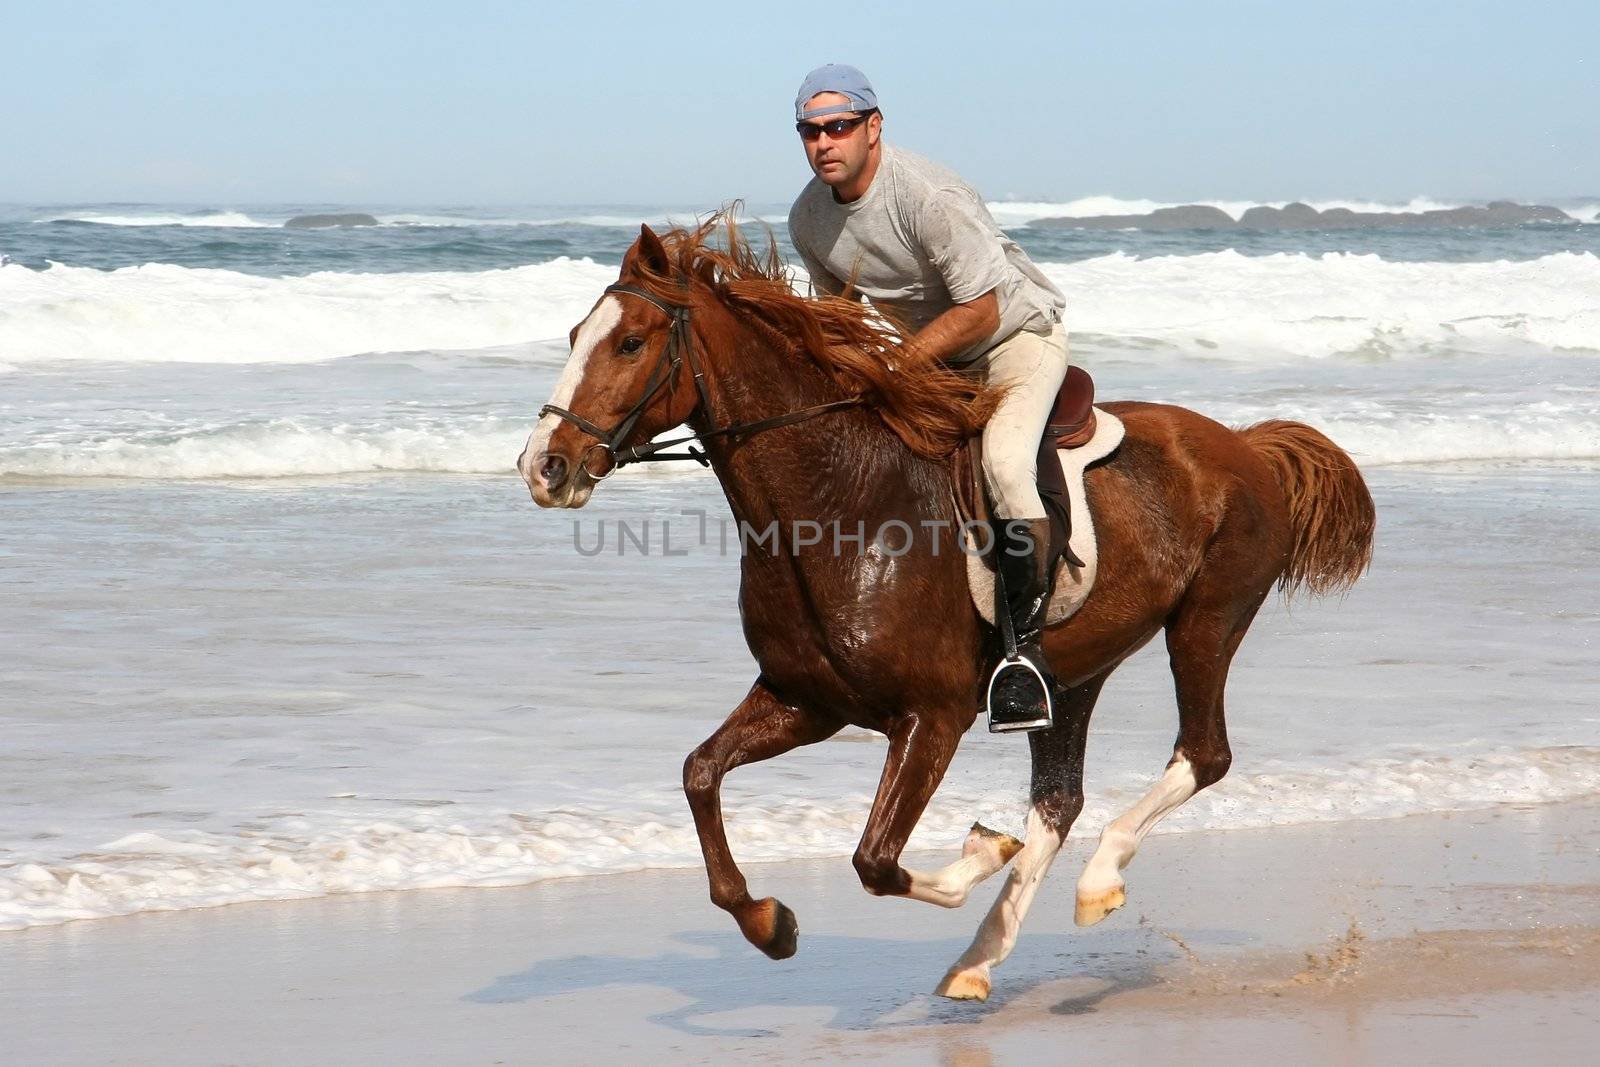 Galloping brown horse and rider at the beach